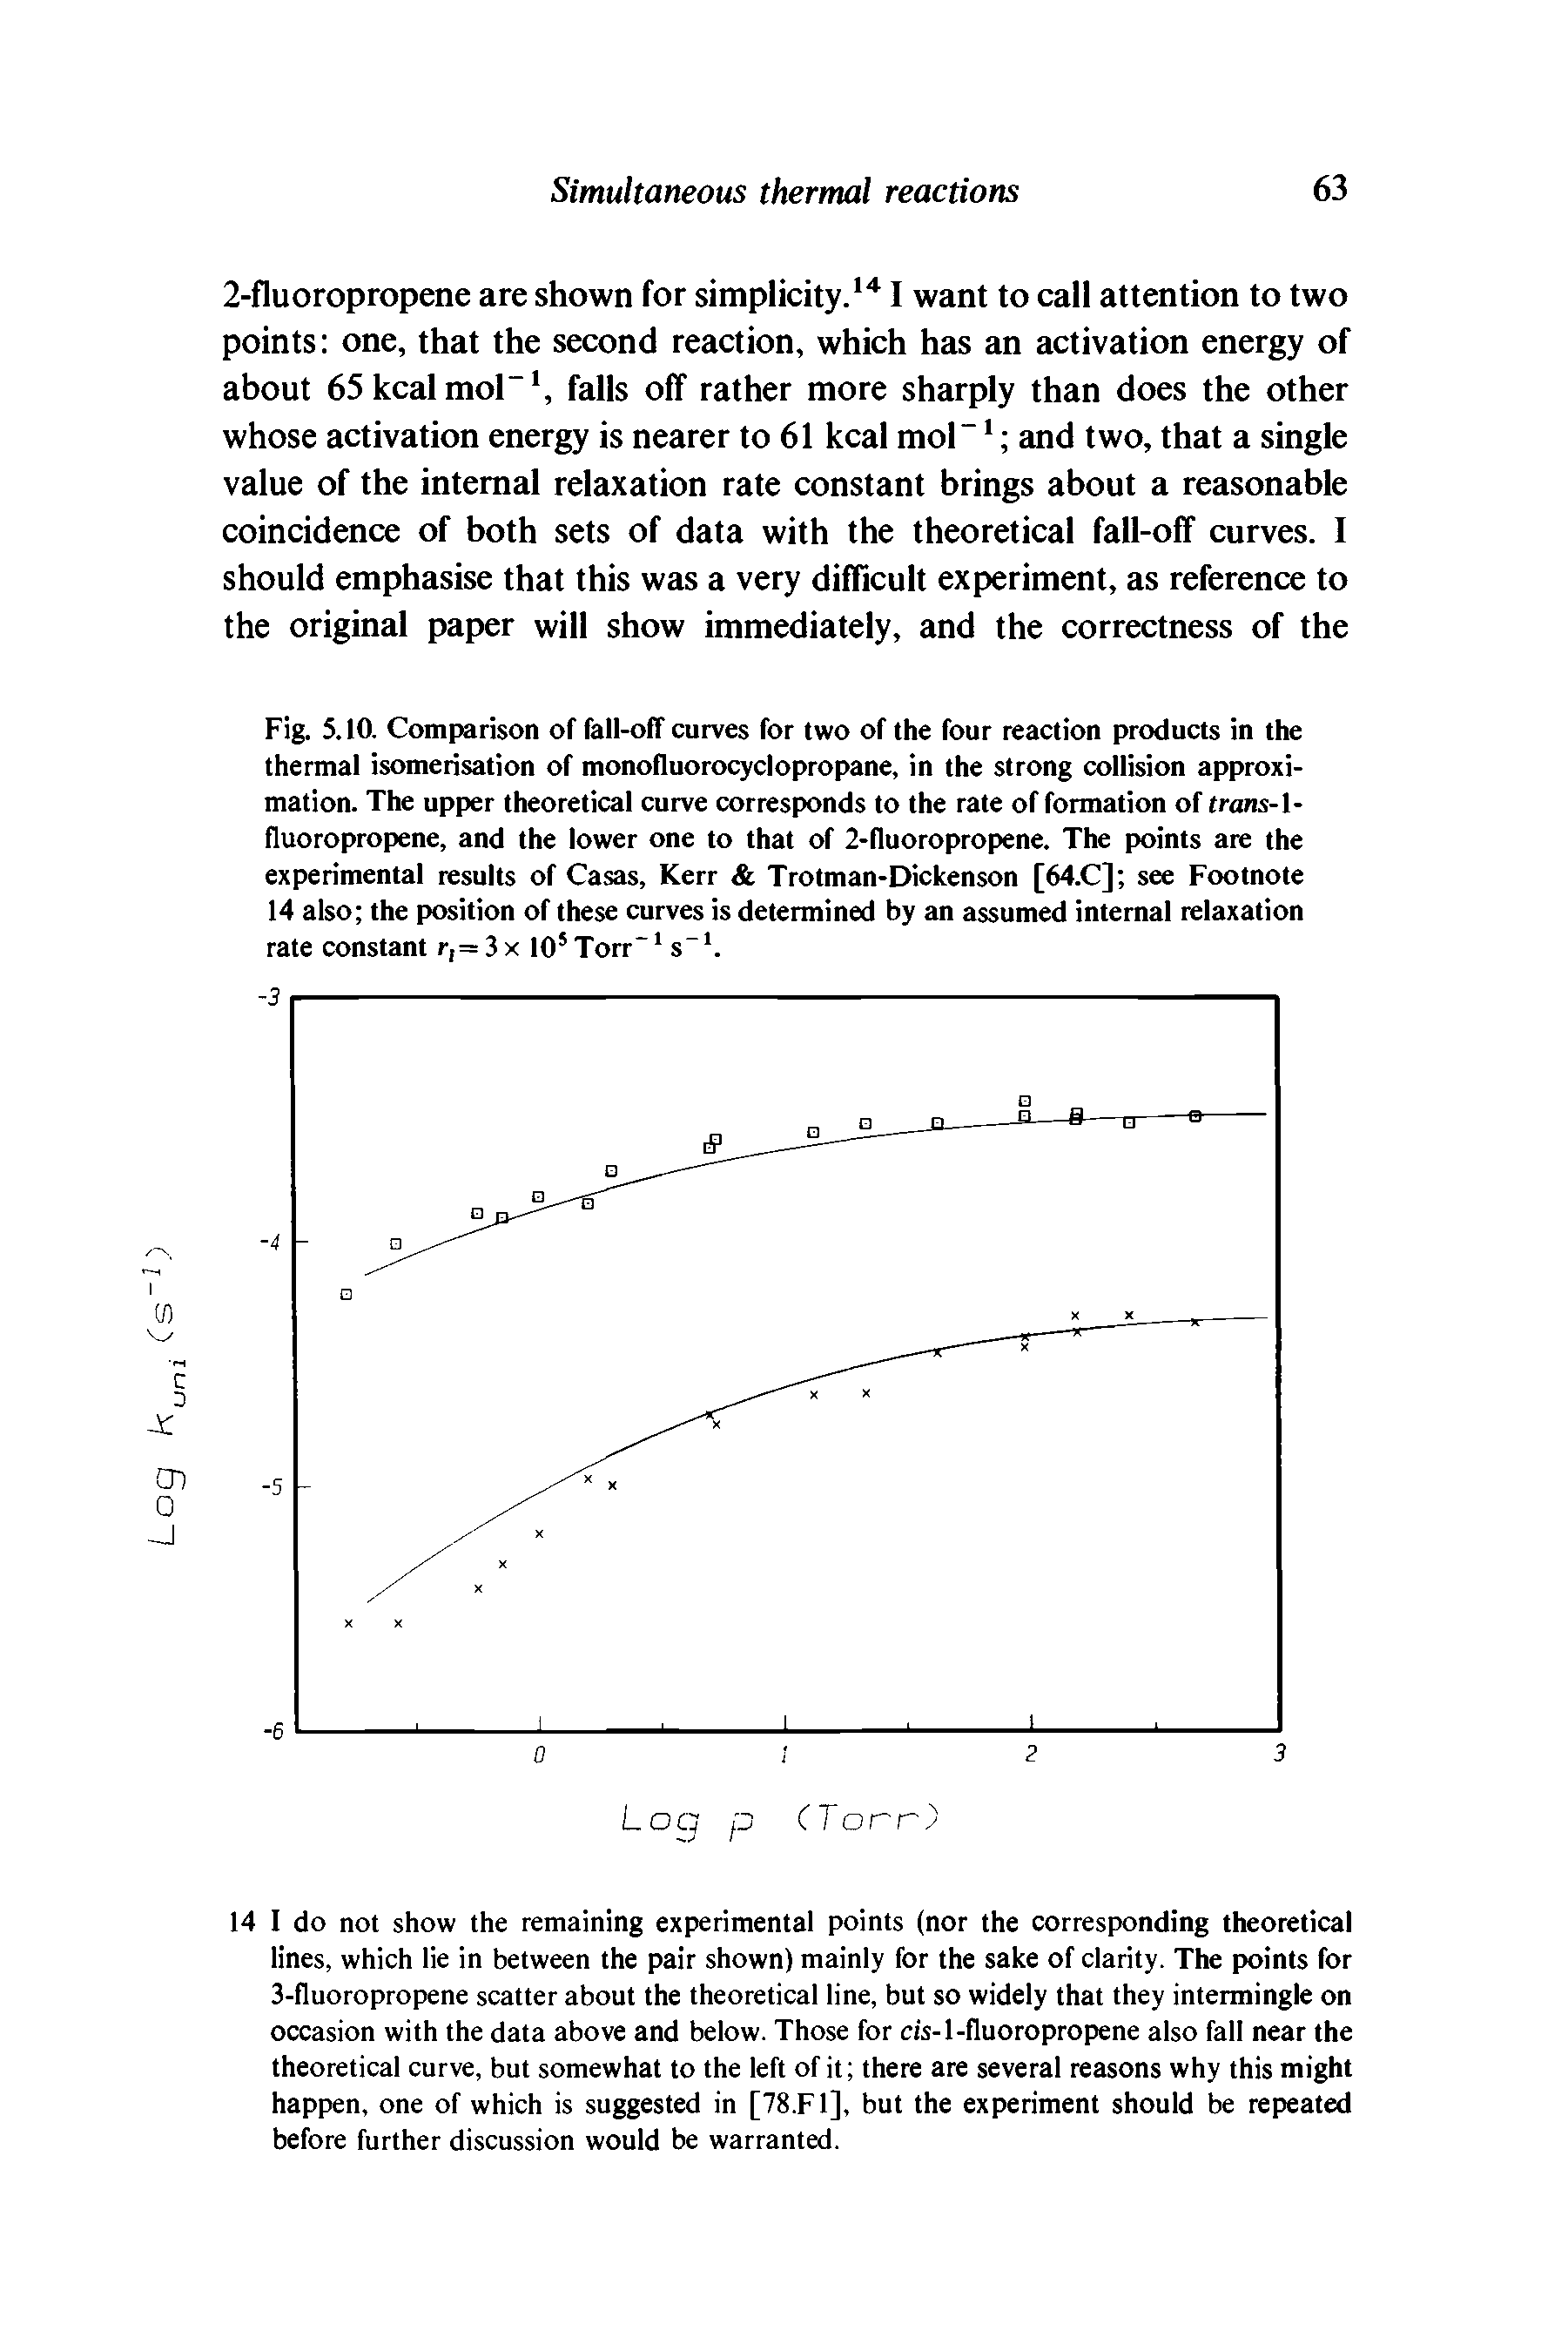 Fig. 5.10. Comparison of fall-off curves for two of the four reaction products in the thermal isomerisation of monofluorocyclopropane, in the strong collision approximation. The upper theoretical curve corresponds to the rate of formation of (rans-1-fluoropropene, and the lower one to that of 2-fluoropropene. The points are the experimental results of Casas, Kerr Trotman-Dickenson [64.C] see Footnote 14 also the position of these curves is determined by an assumed internal relaxation rate constant r,= 3x 10 Torr s .